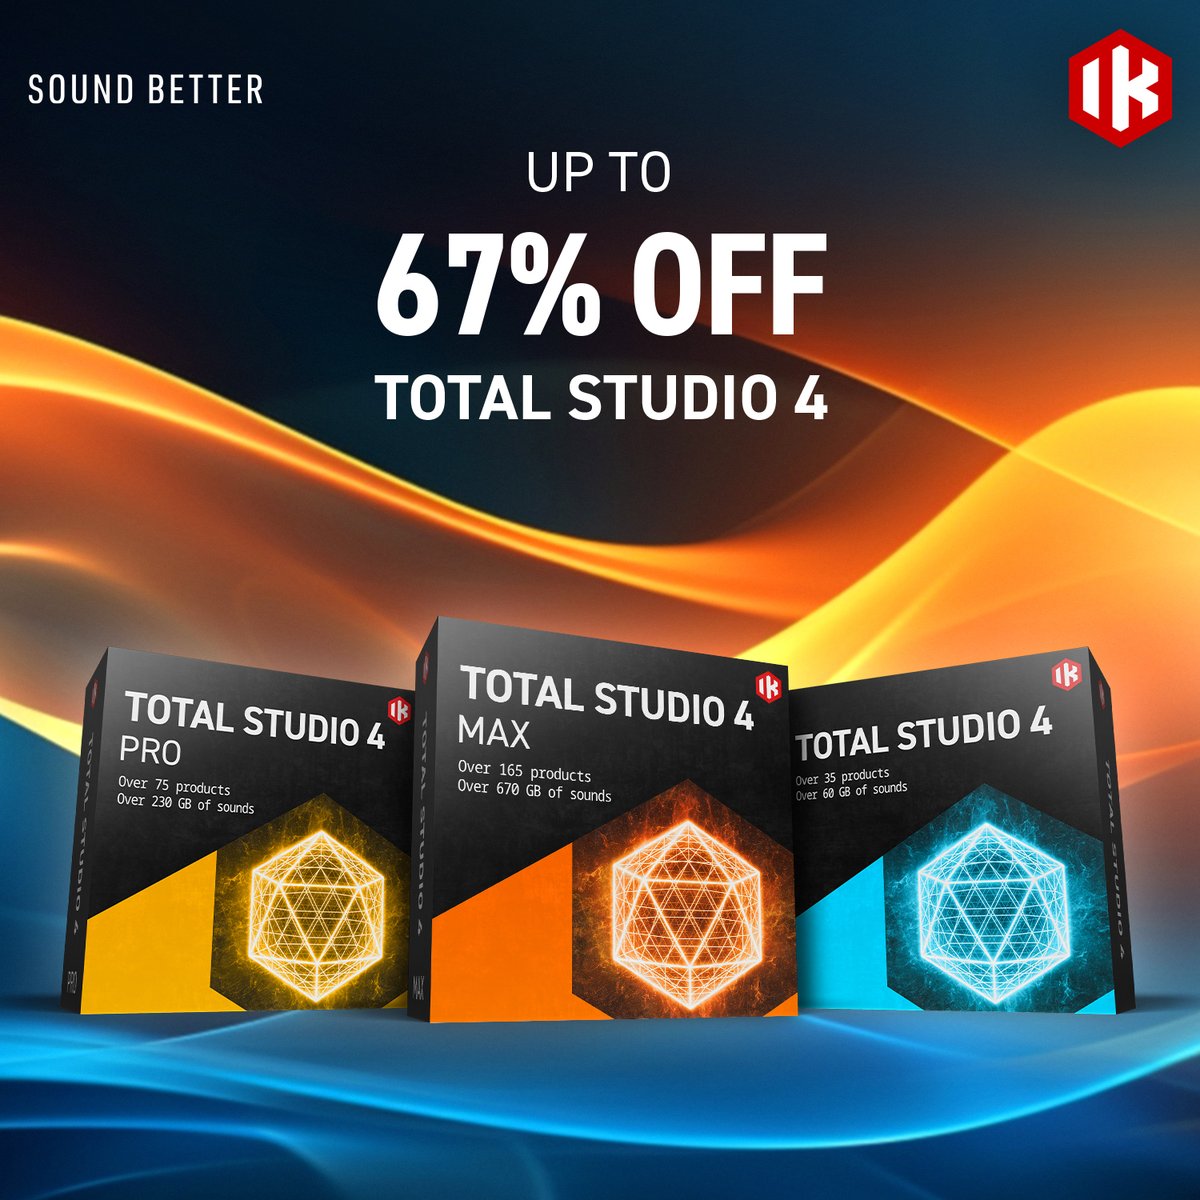 This #MemorialDay weekend, save big on Total Studio 4 software bundles, including everything you need to create your musical masterpiece. 🎶 bit.ly/totalmemorial24